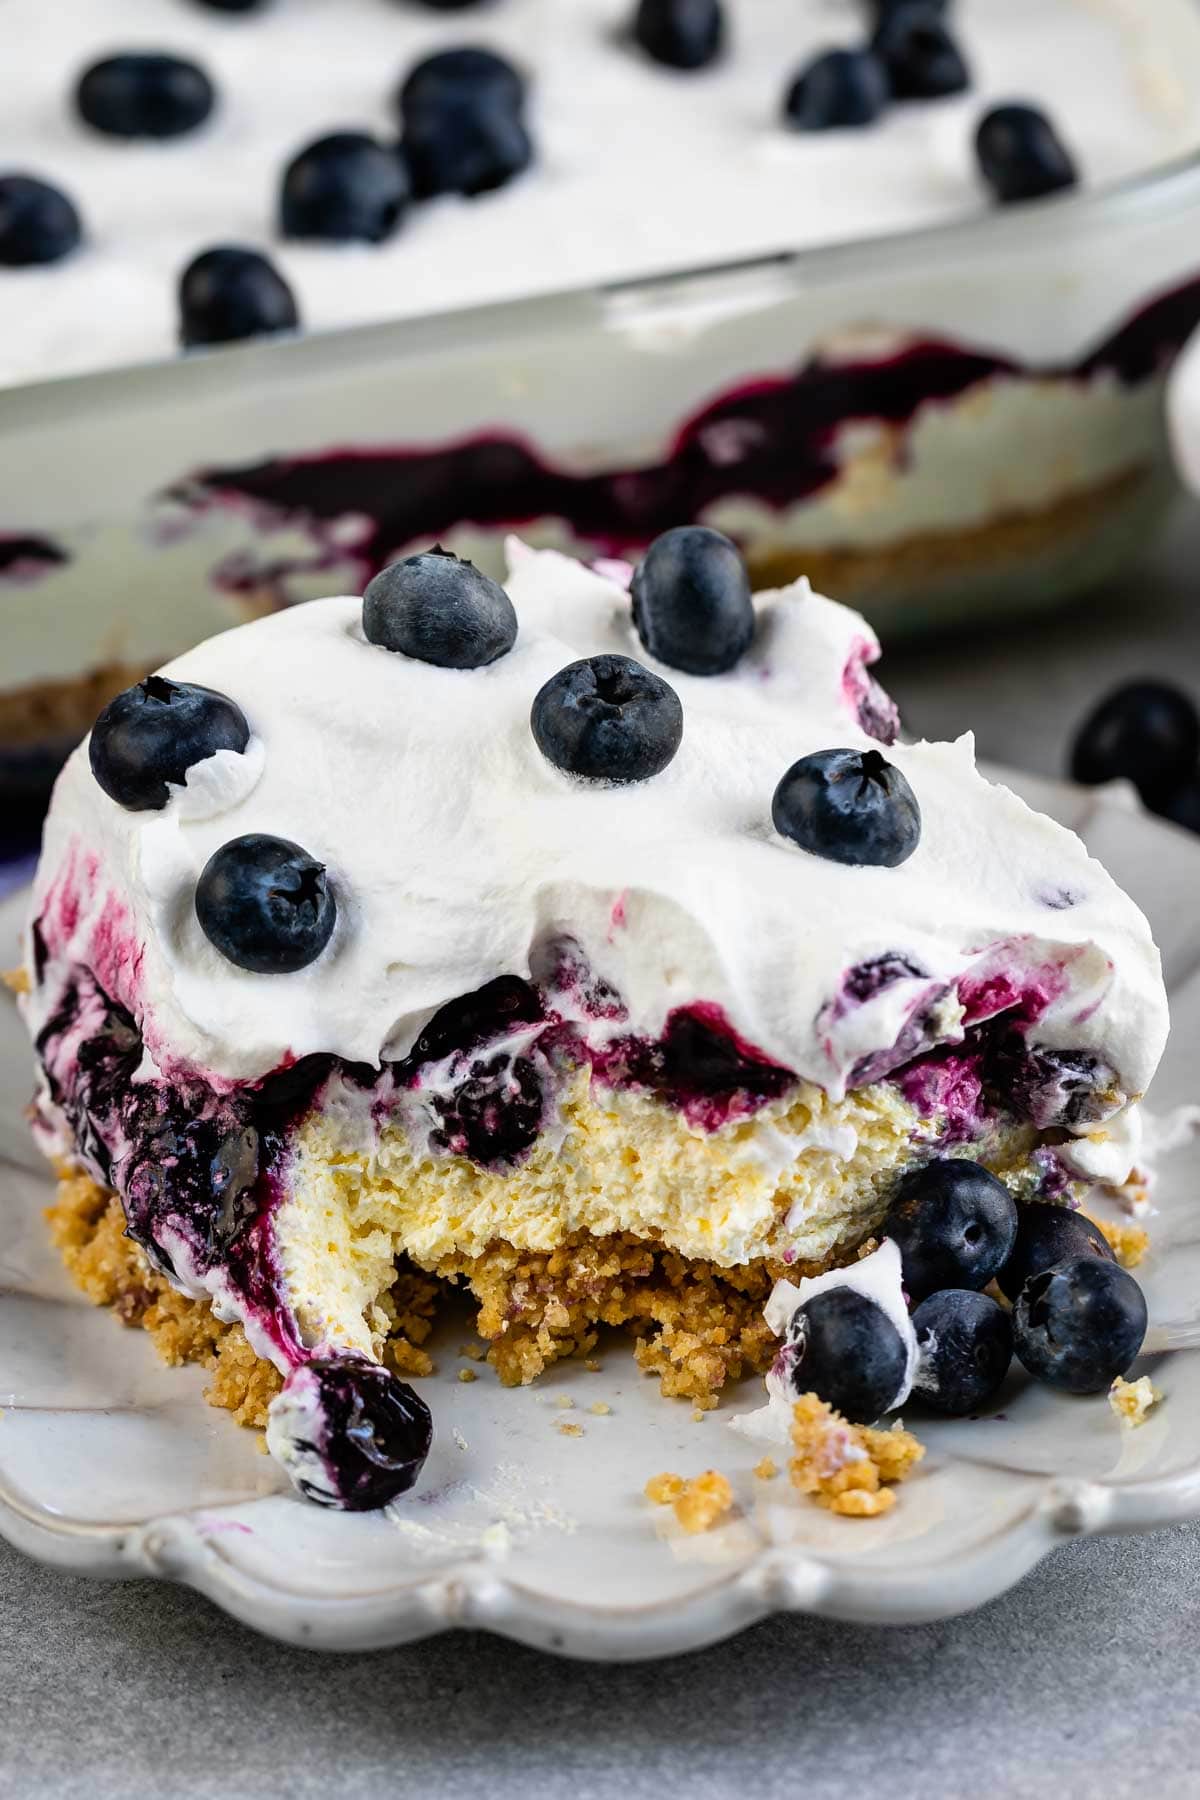 One large square slice of blueberry delight lush on a plate with one corner bite missing